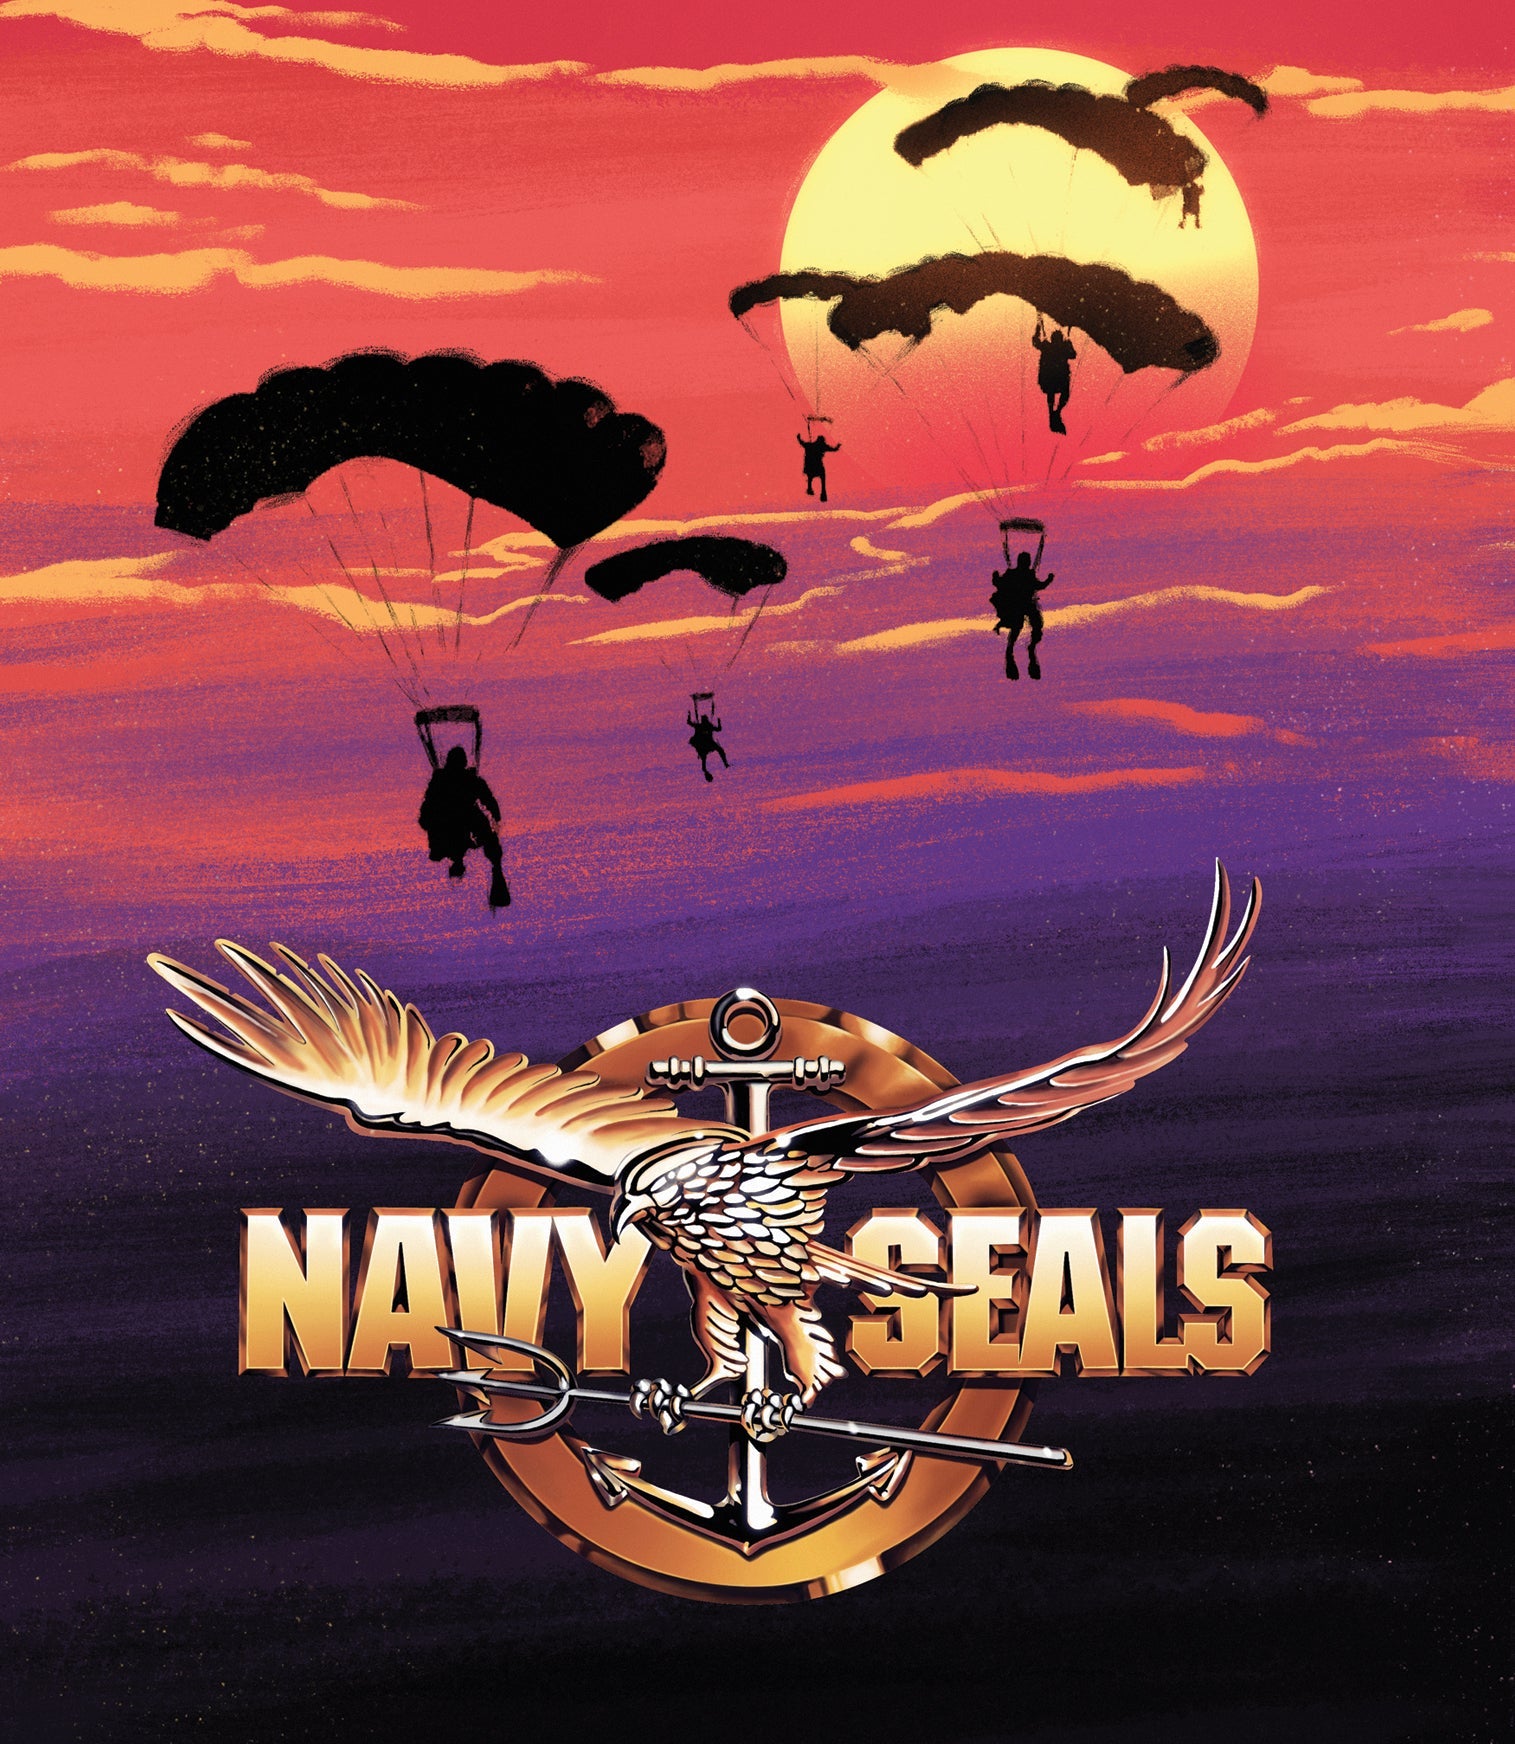 NAVY SEALS (LIMITED EDITION) 4K UHD/BLU-RAY [PRE-ORDER]